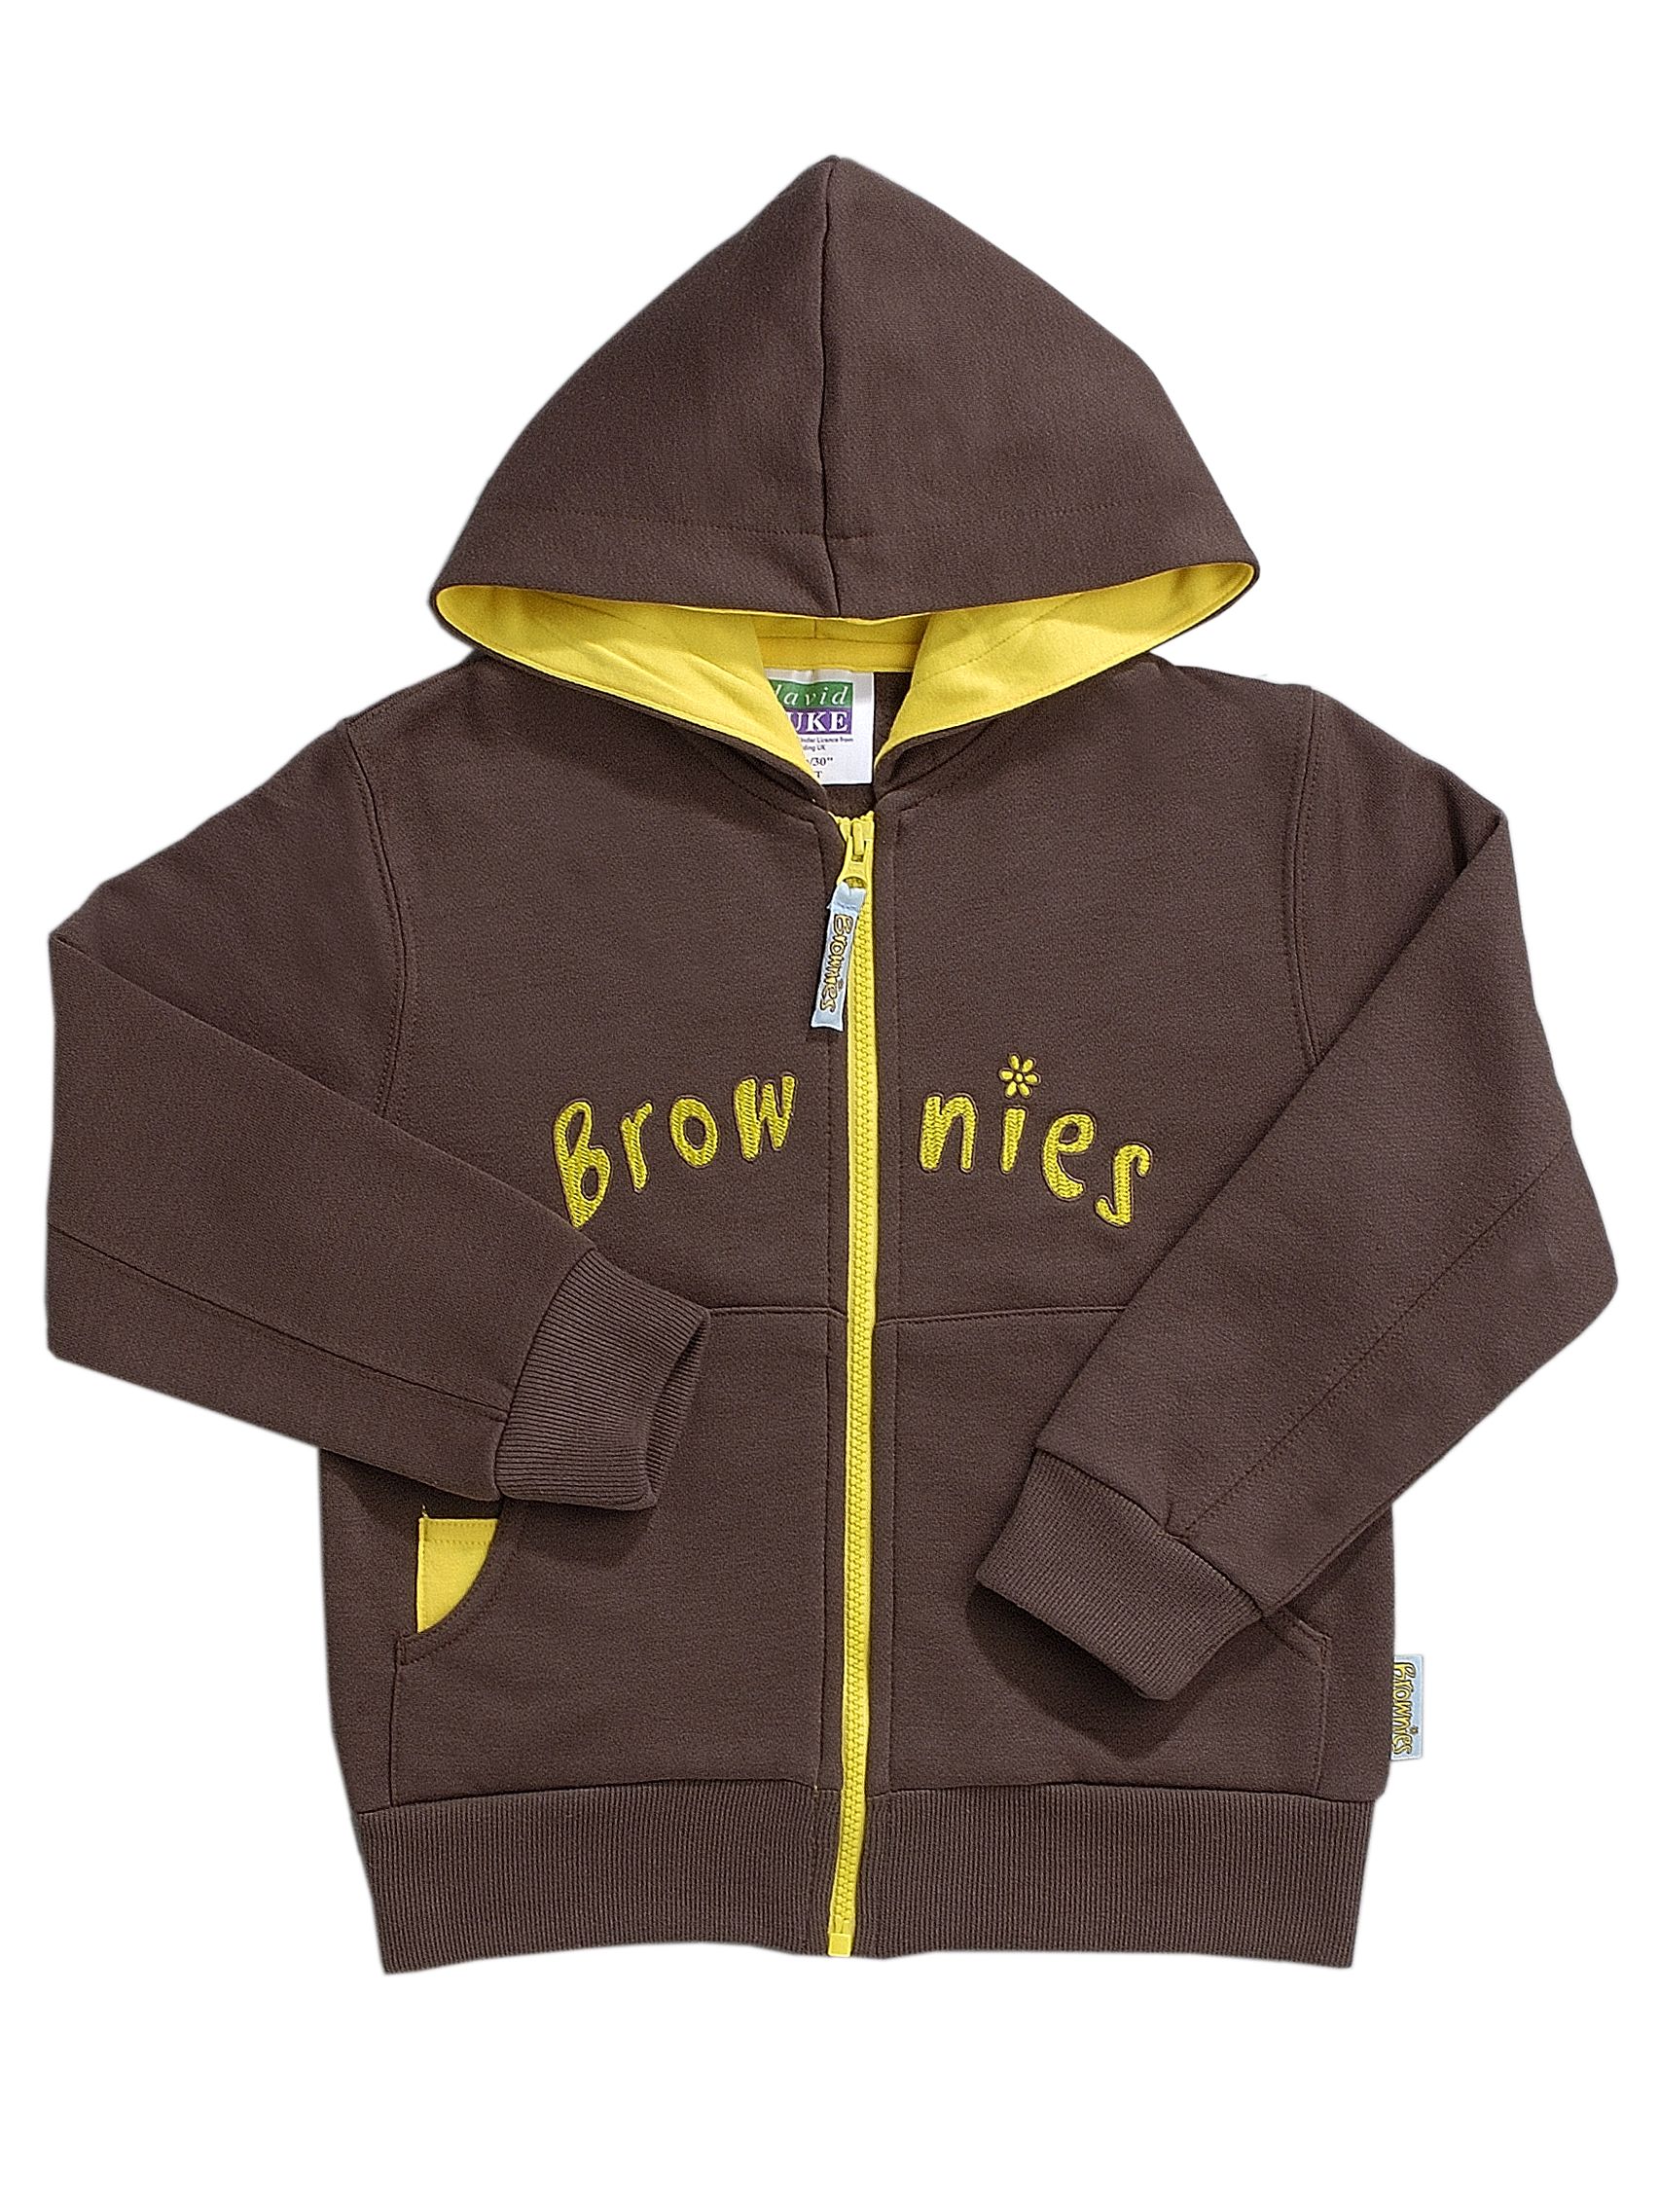 Brownies Hooded Zipped Top, Chest 86cm